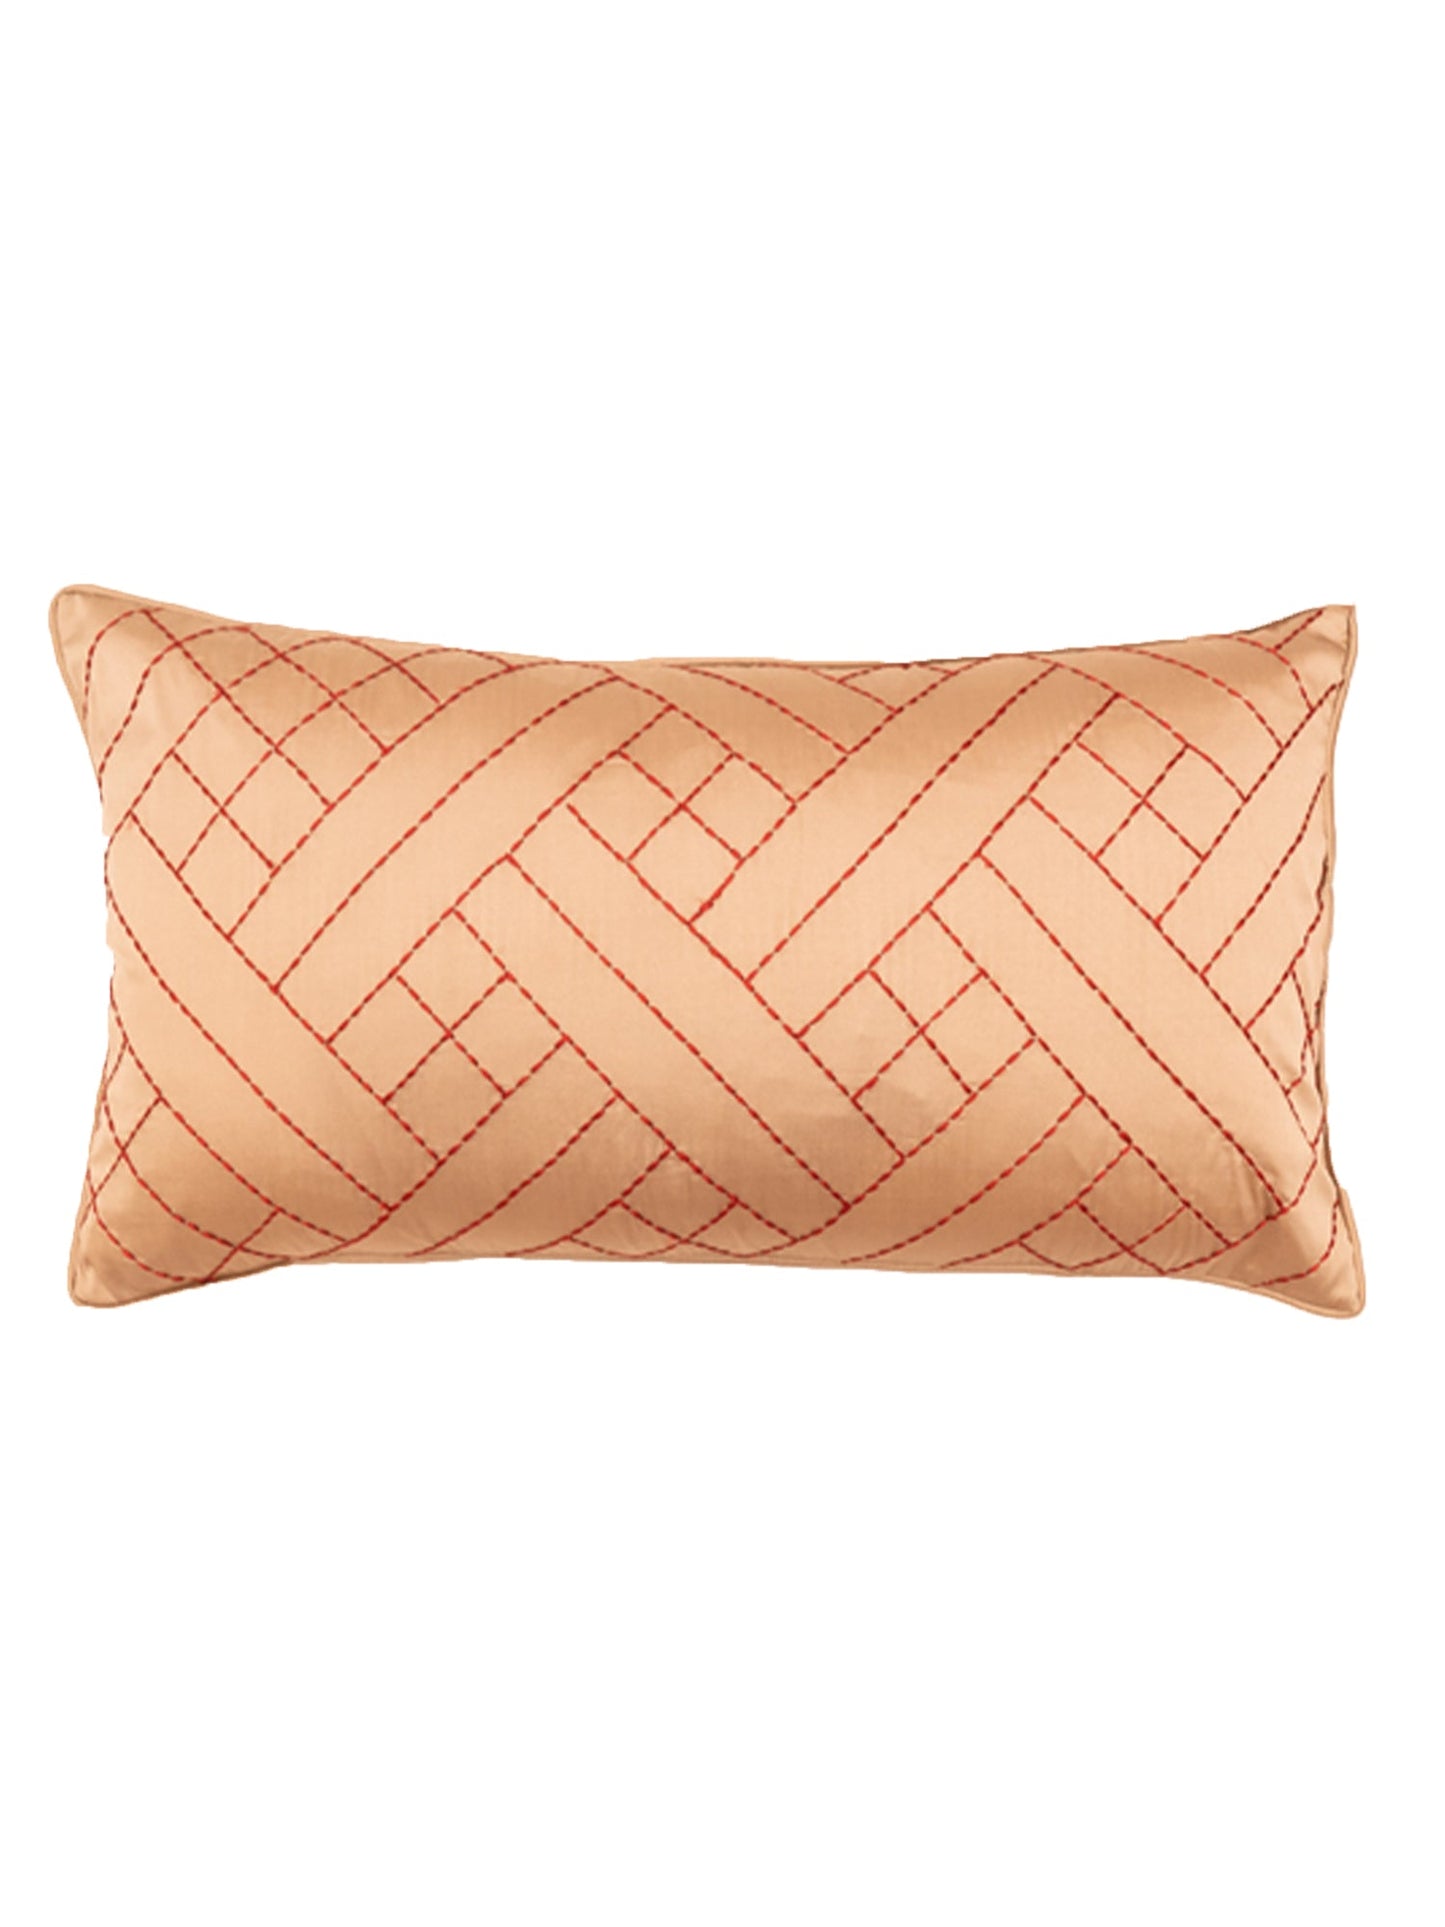 Embroidered Cushion Cover Polyester Brown - 12" X 22"